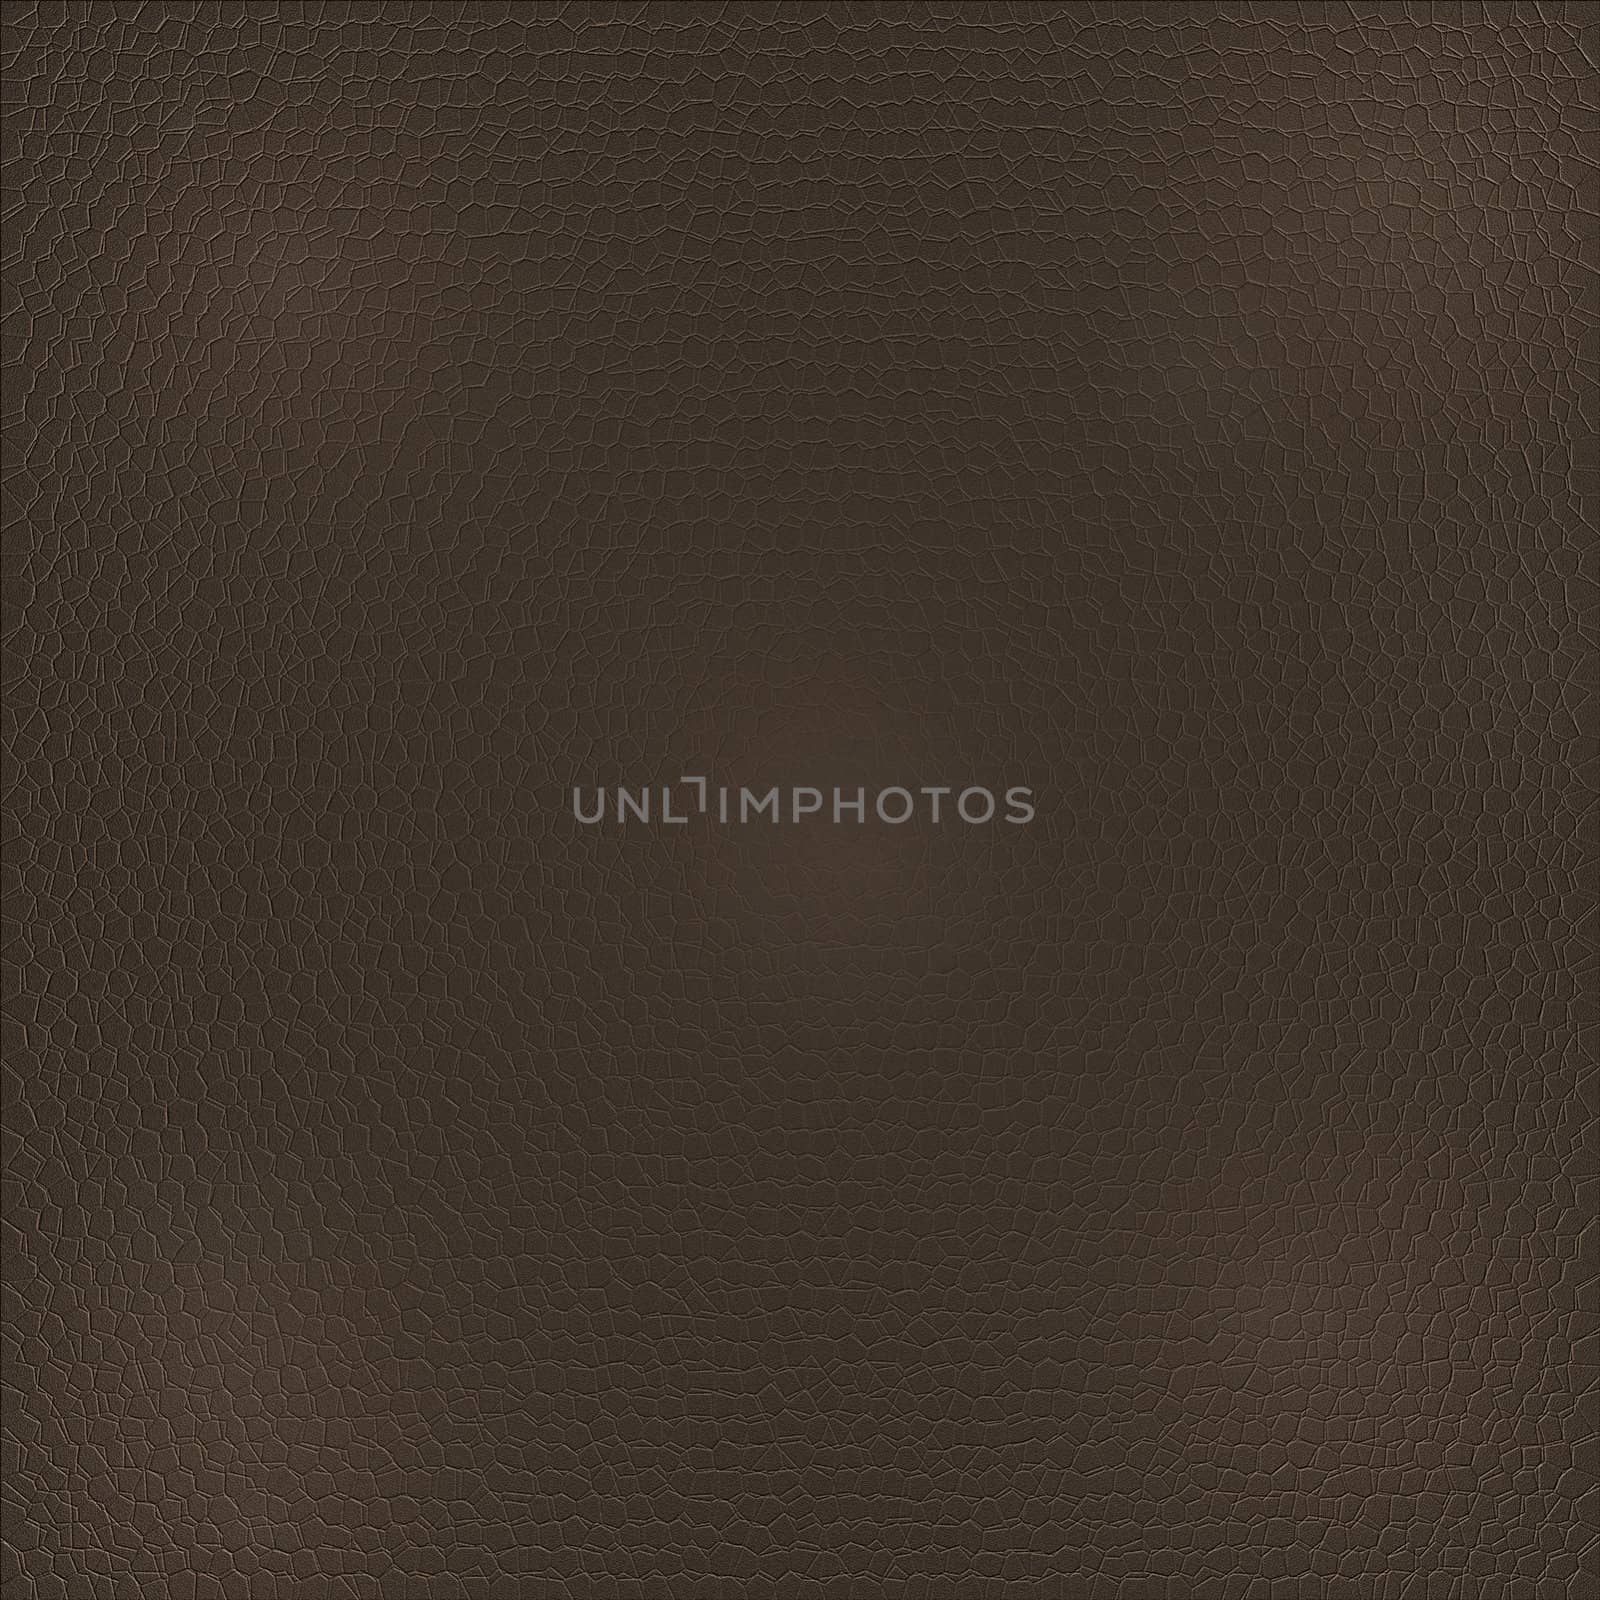 Seamless brown leather background